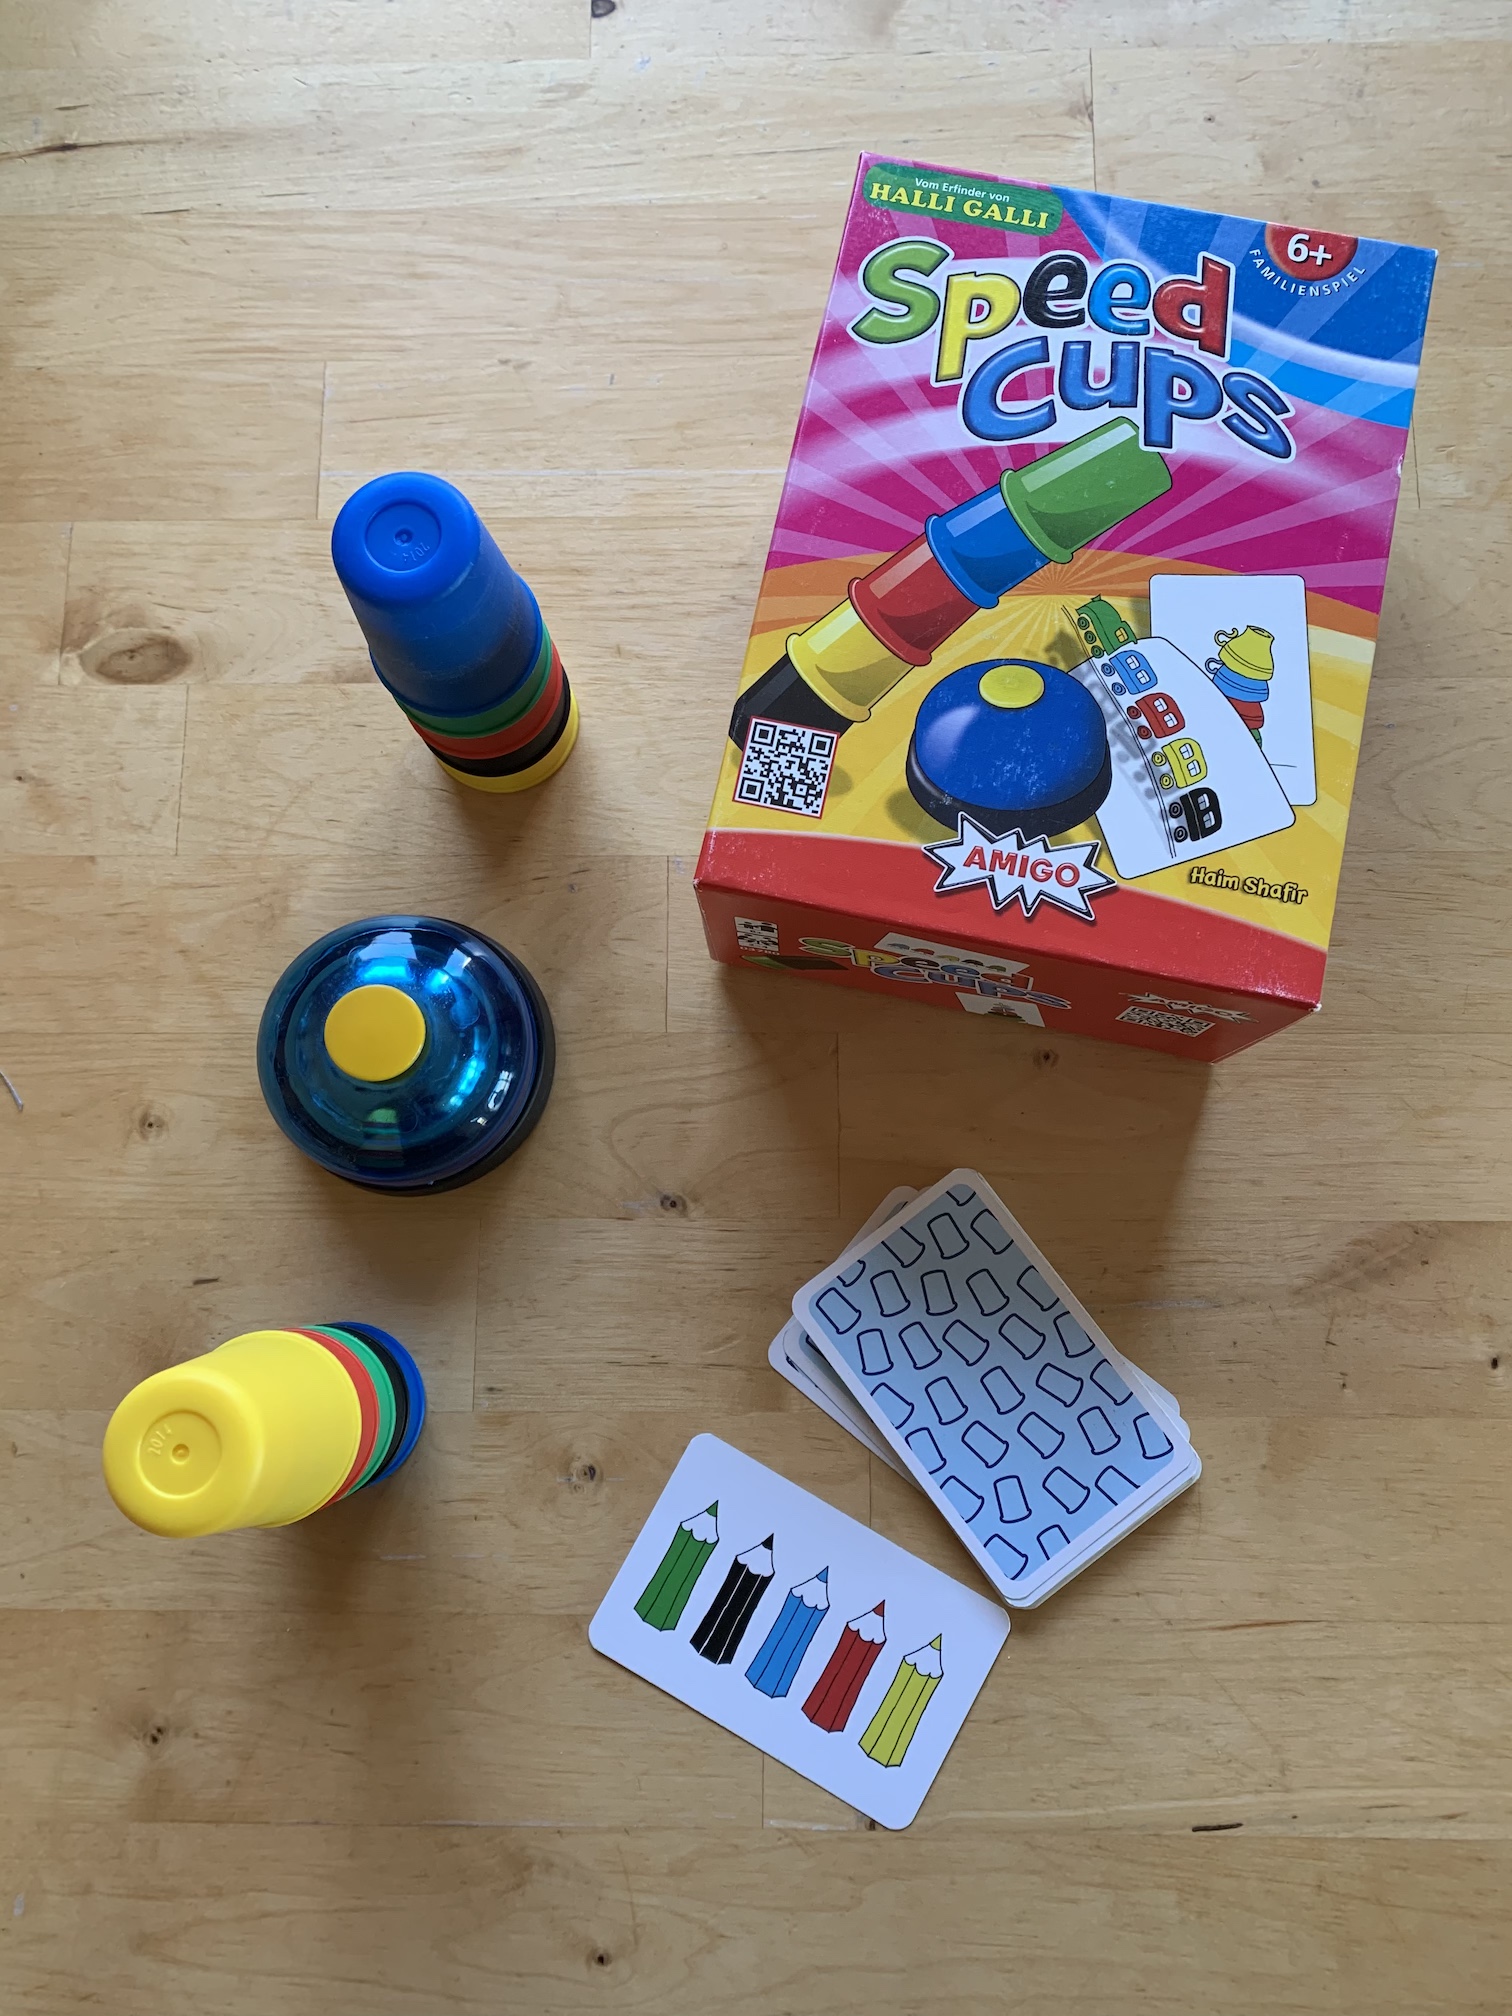 Game-Based Learning in der Schule: Speed Cups - digital